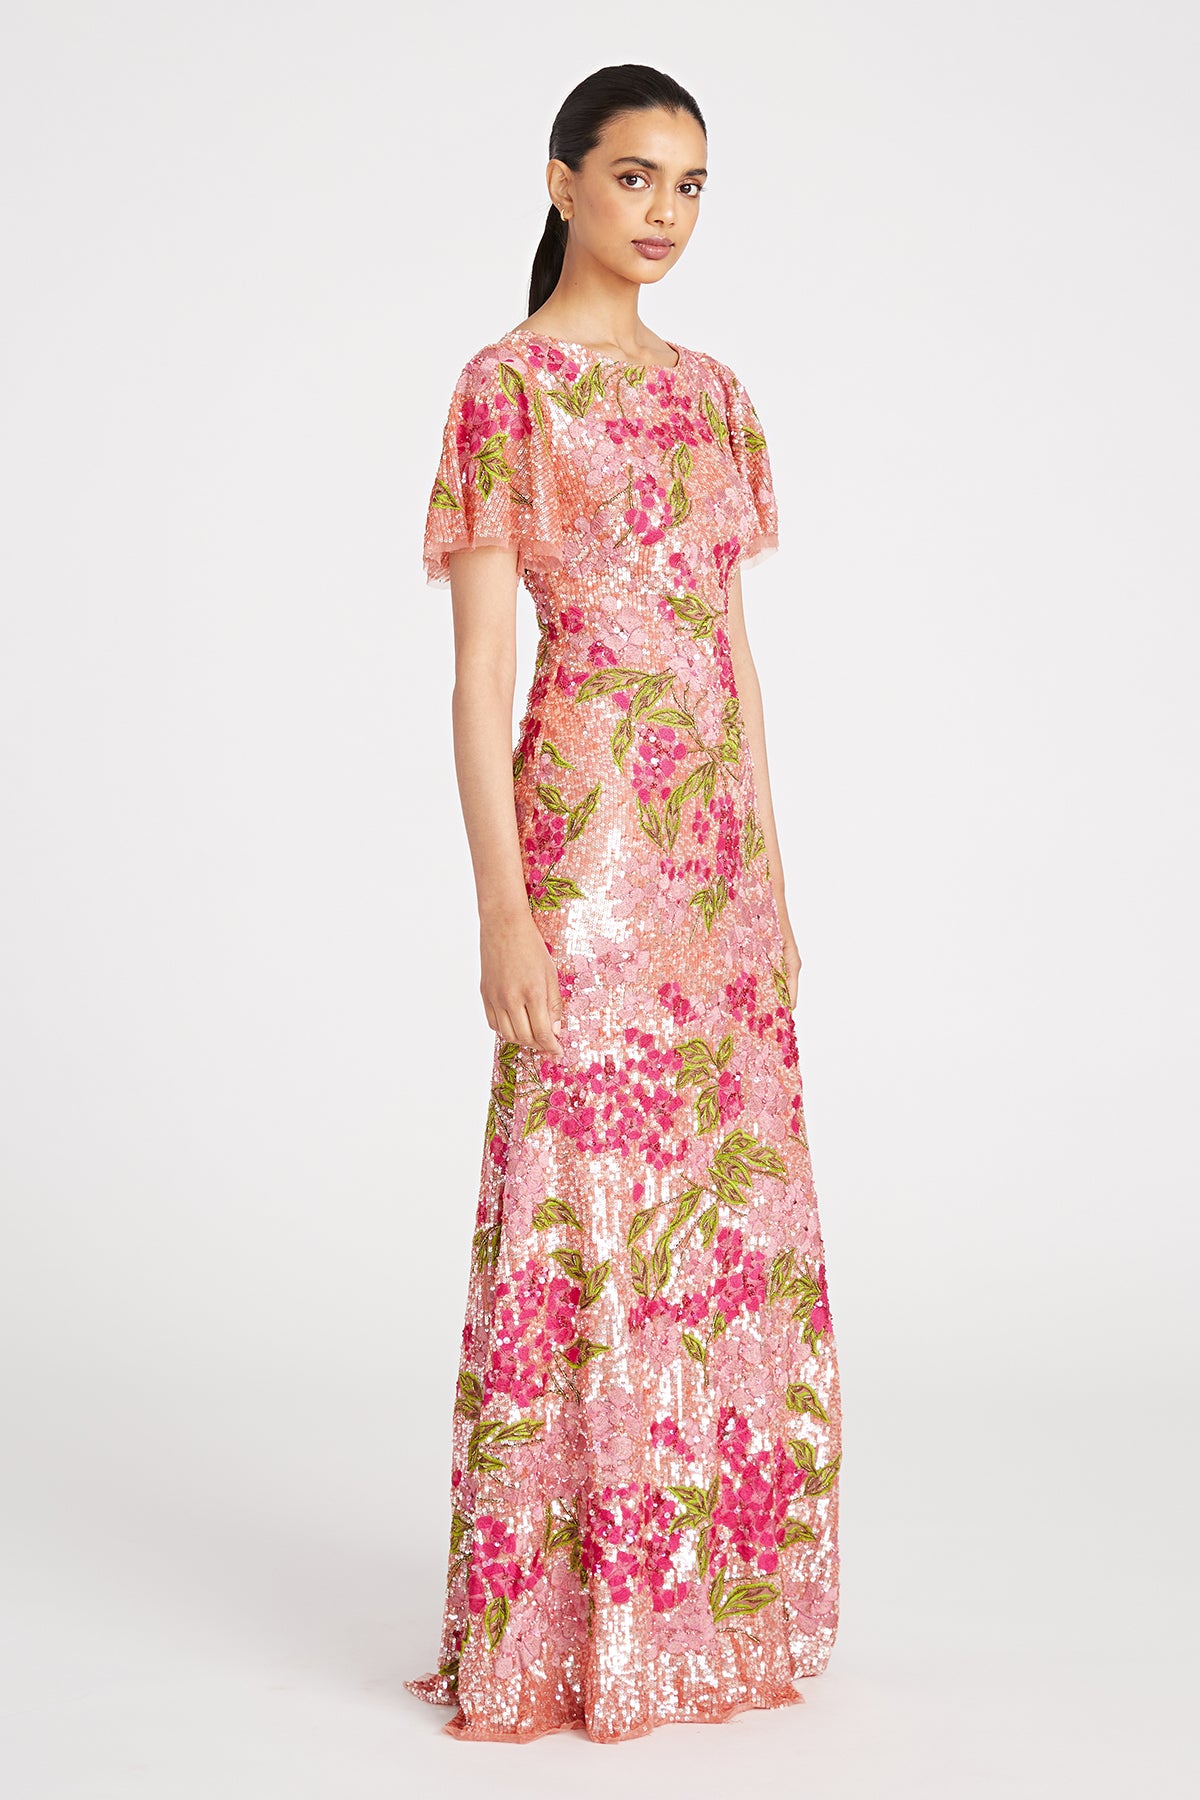 Gina Bacconi Arianna Floral Embroidered Dress, Plum, £184.00